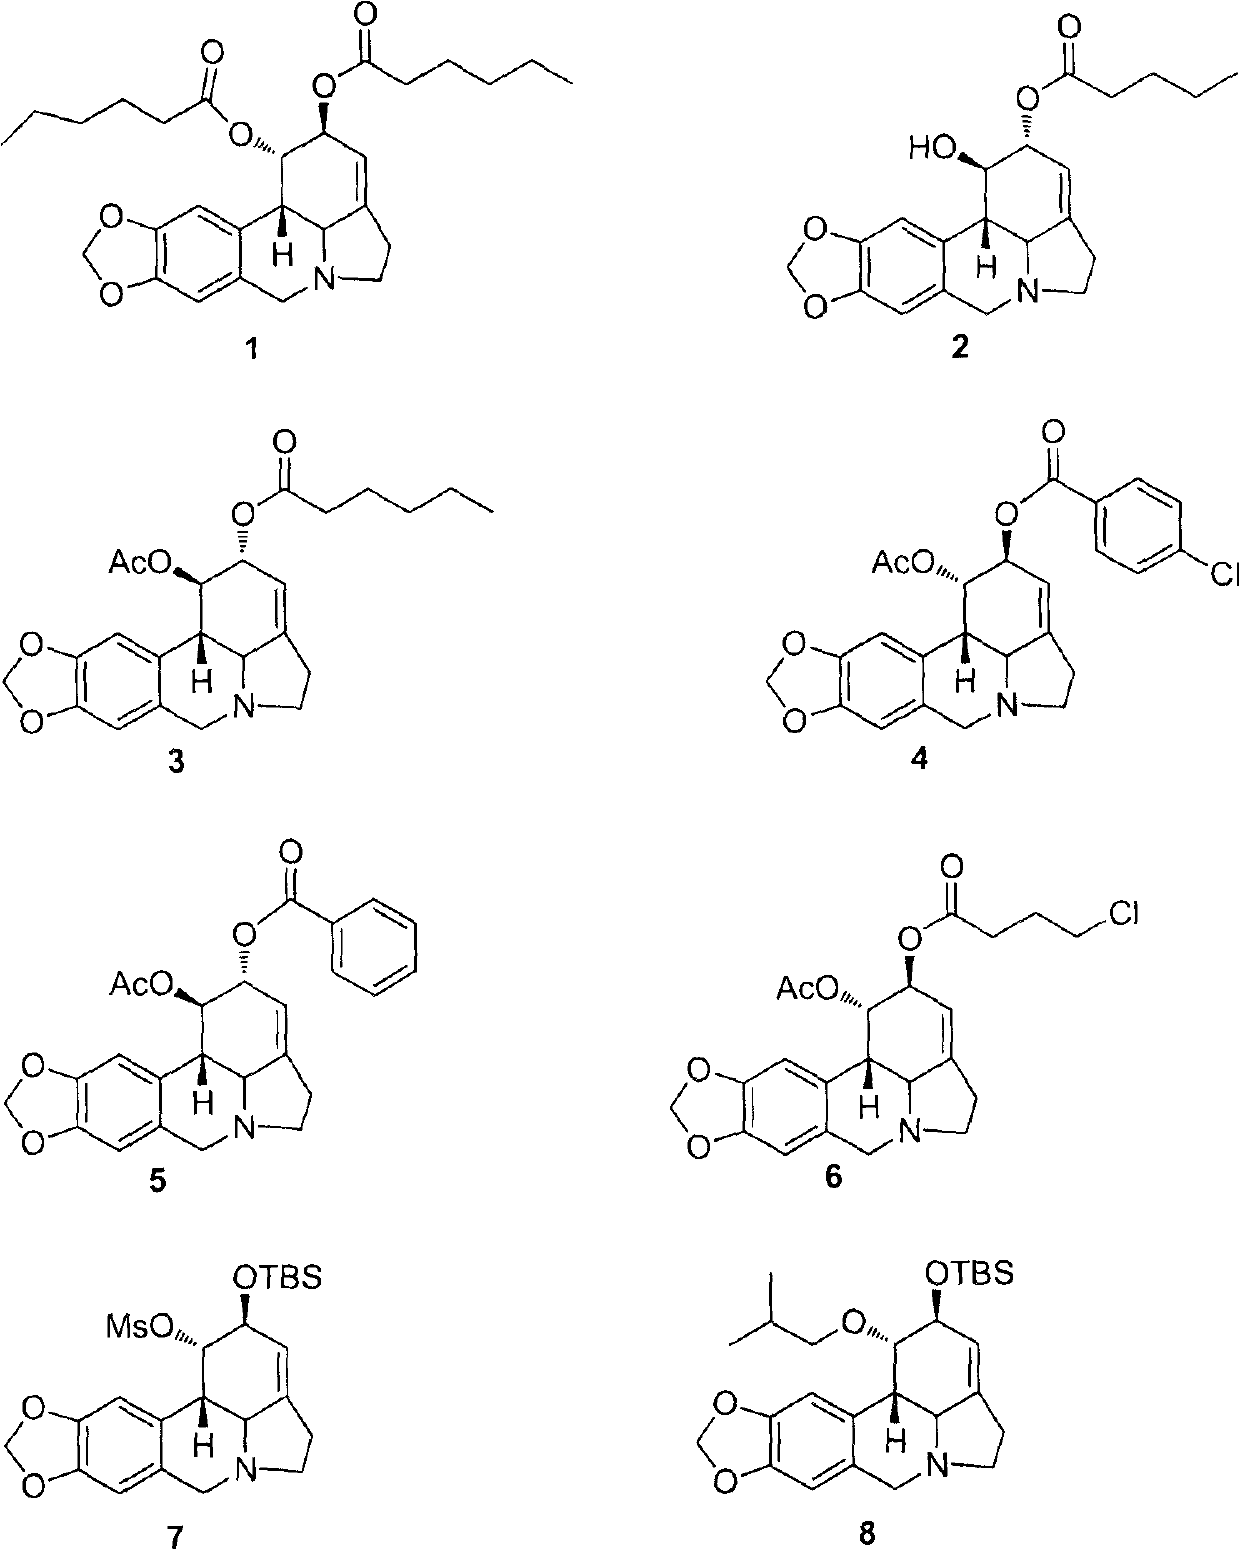 Application of Lycorine compound in preparation of anti-tumor drugs